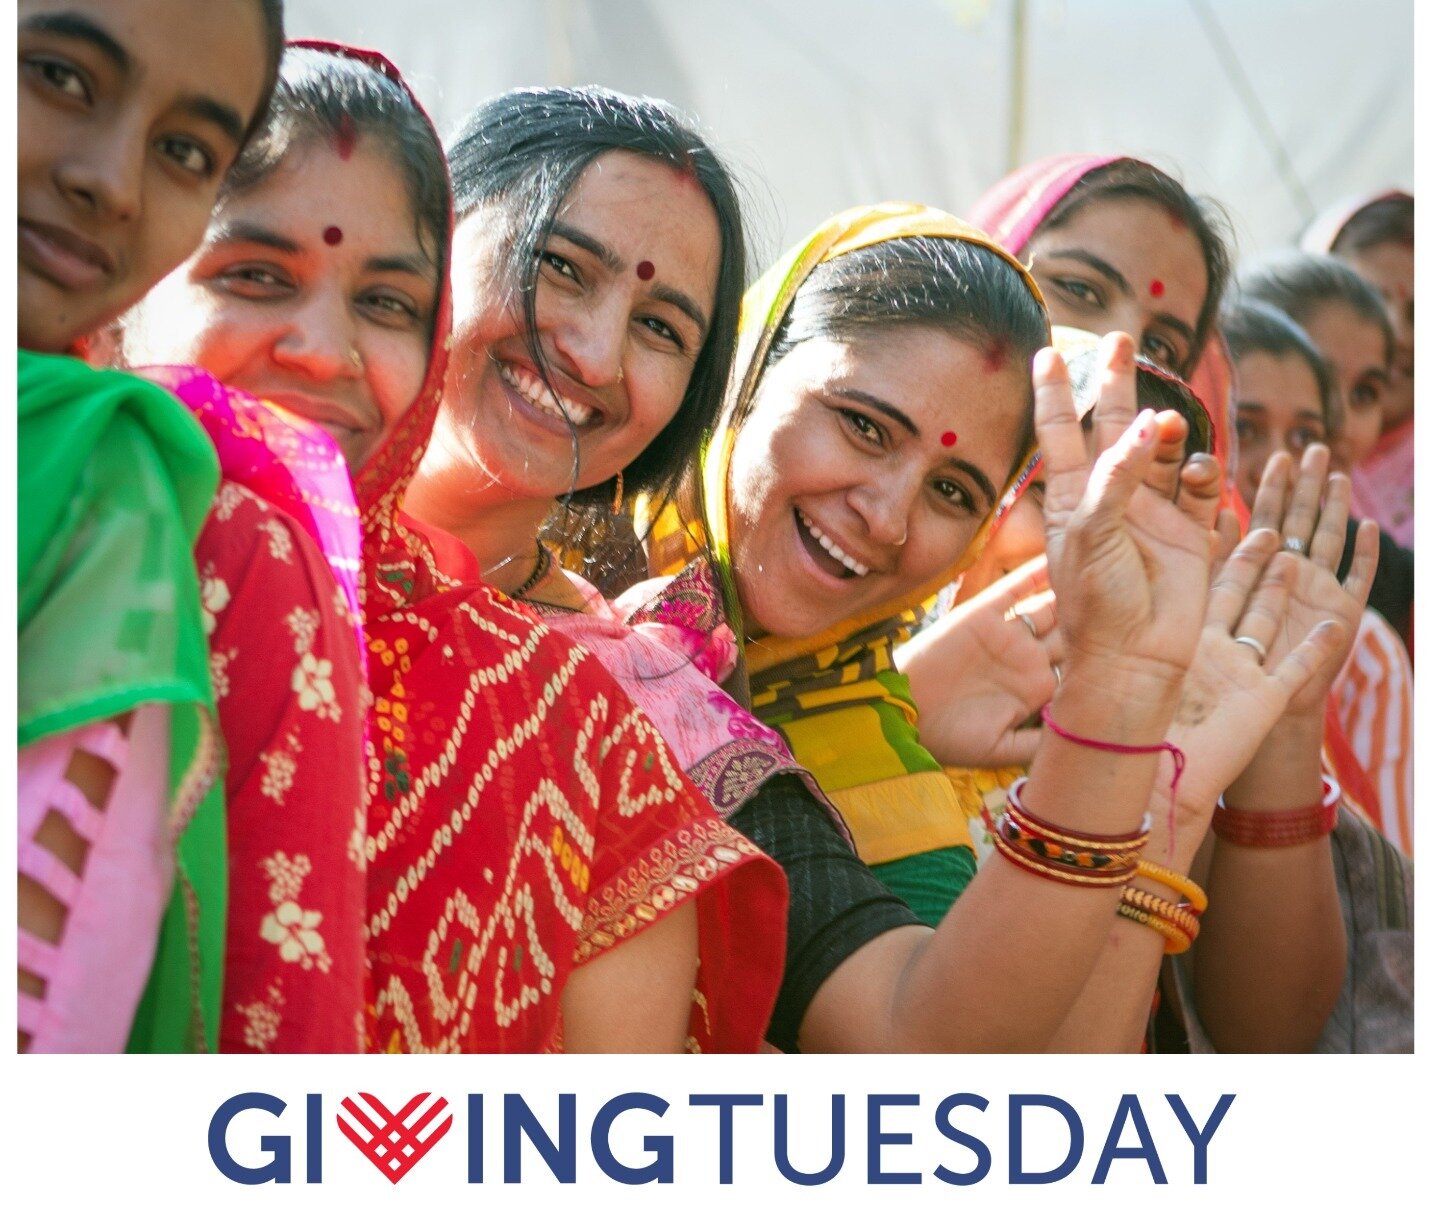 #GivingTuesday starts tomorrow! Bring a bright future to women and girls in Rajasthan, India, who are facing discrimination based on caste, class, and gender with your donation at the link in our bio.